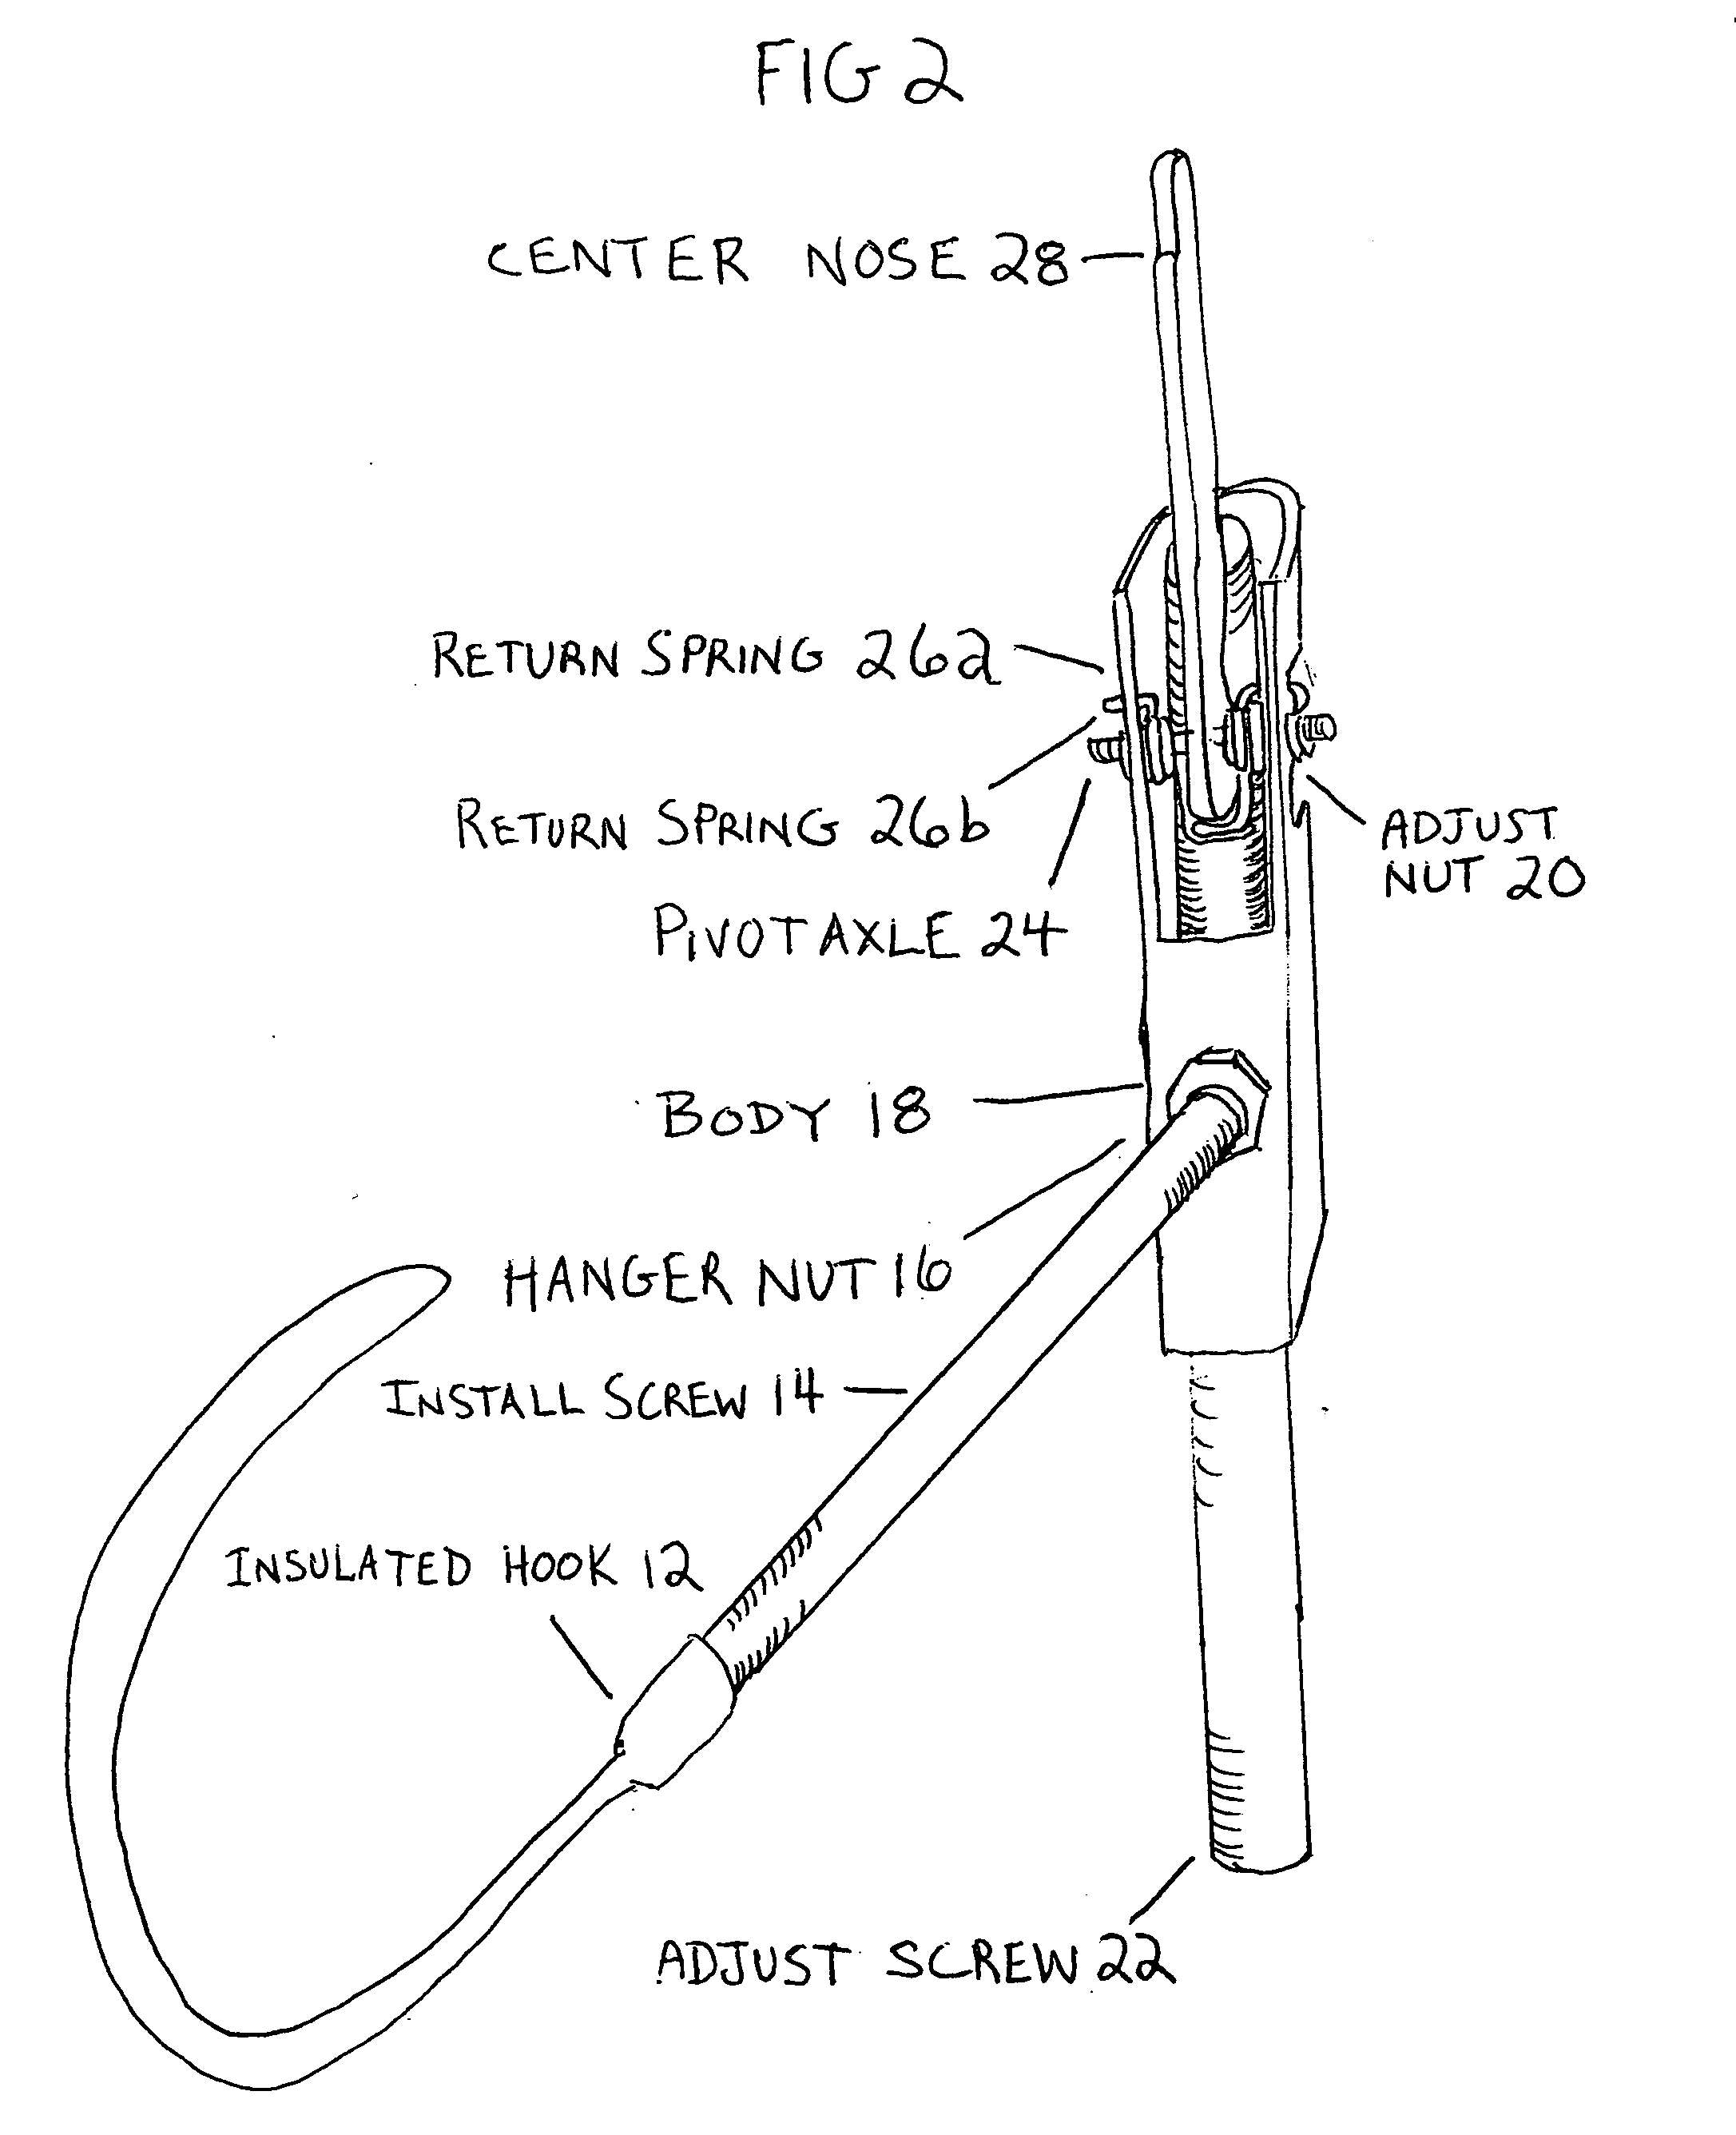 Hanger with an insulated hook